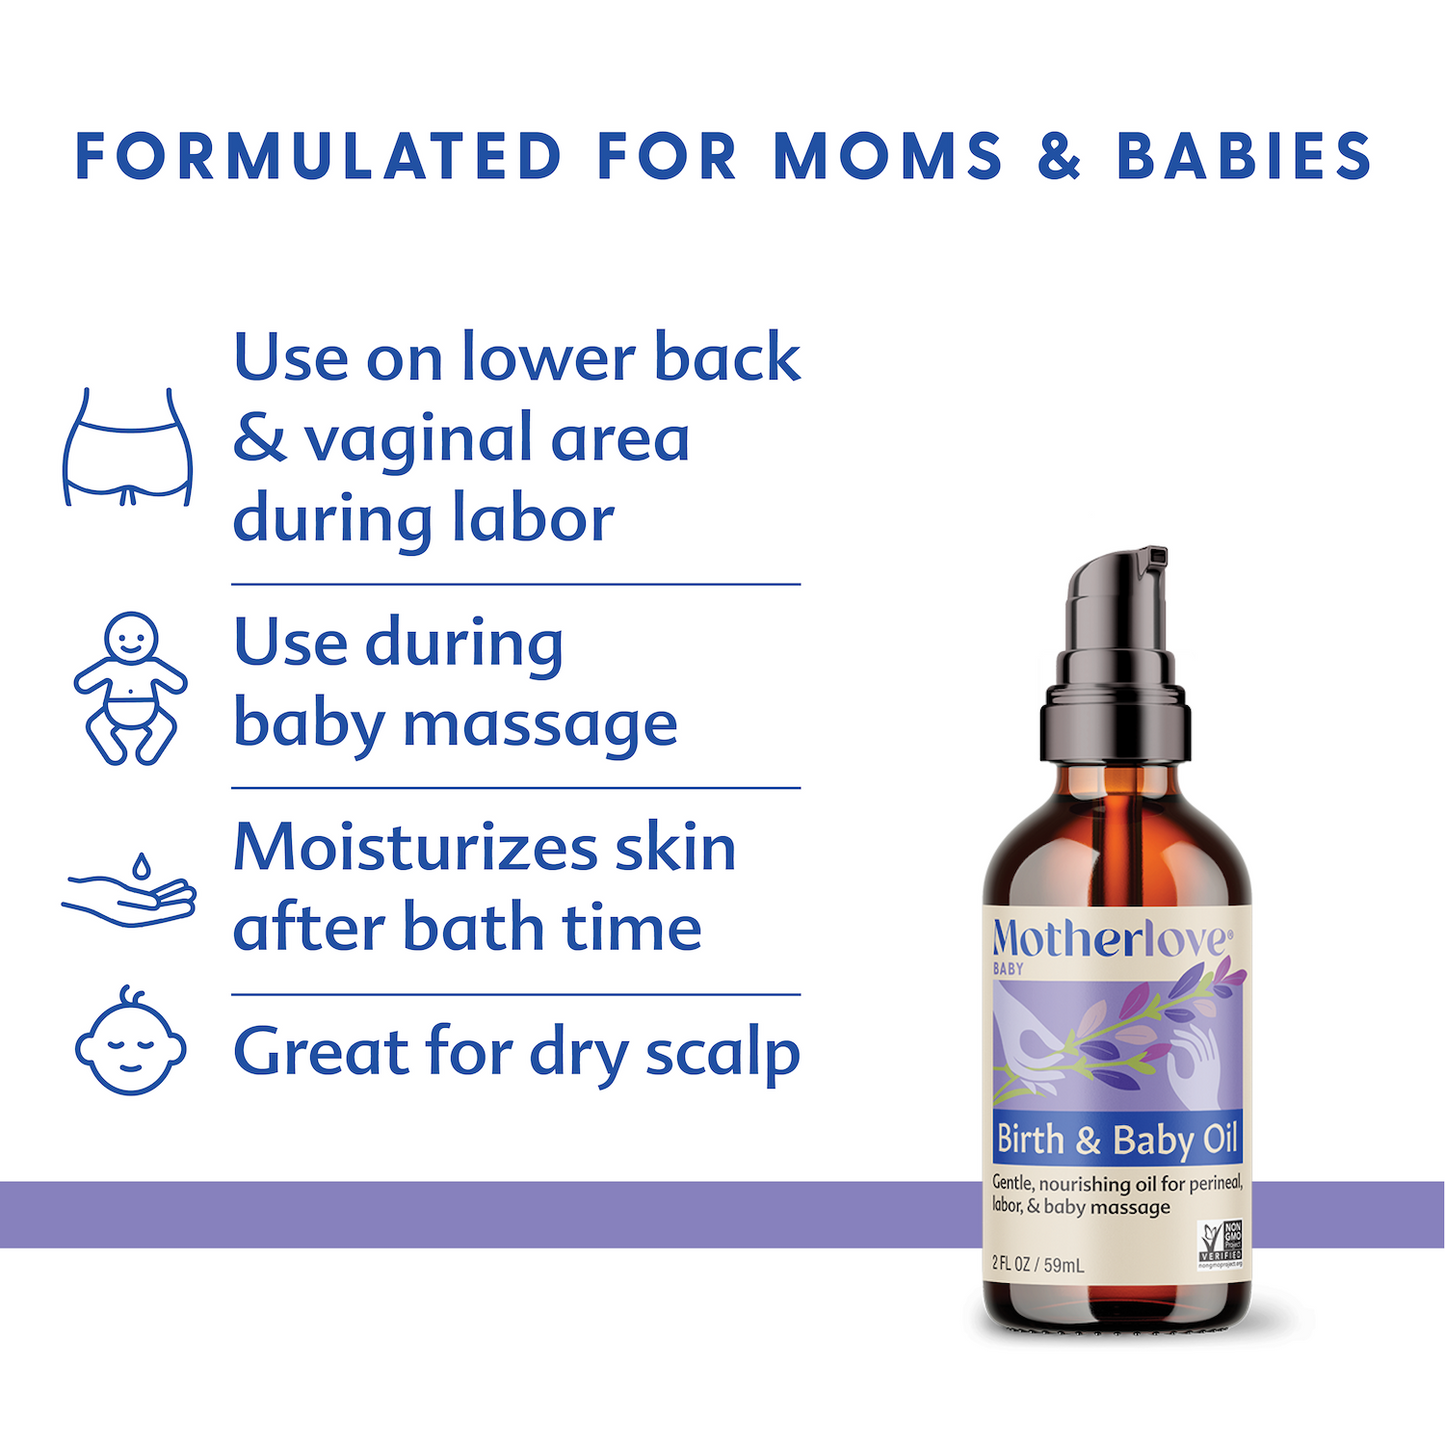 picture of a bottle of motherlove birth and baby oil and how it is formulated for moms and babies, use of lower back and vaginal area during labor, use during baby massage, moisturizes skin after bath time, great for dry scalp